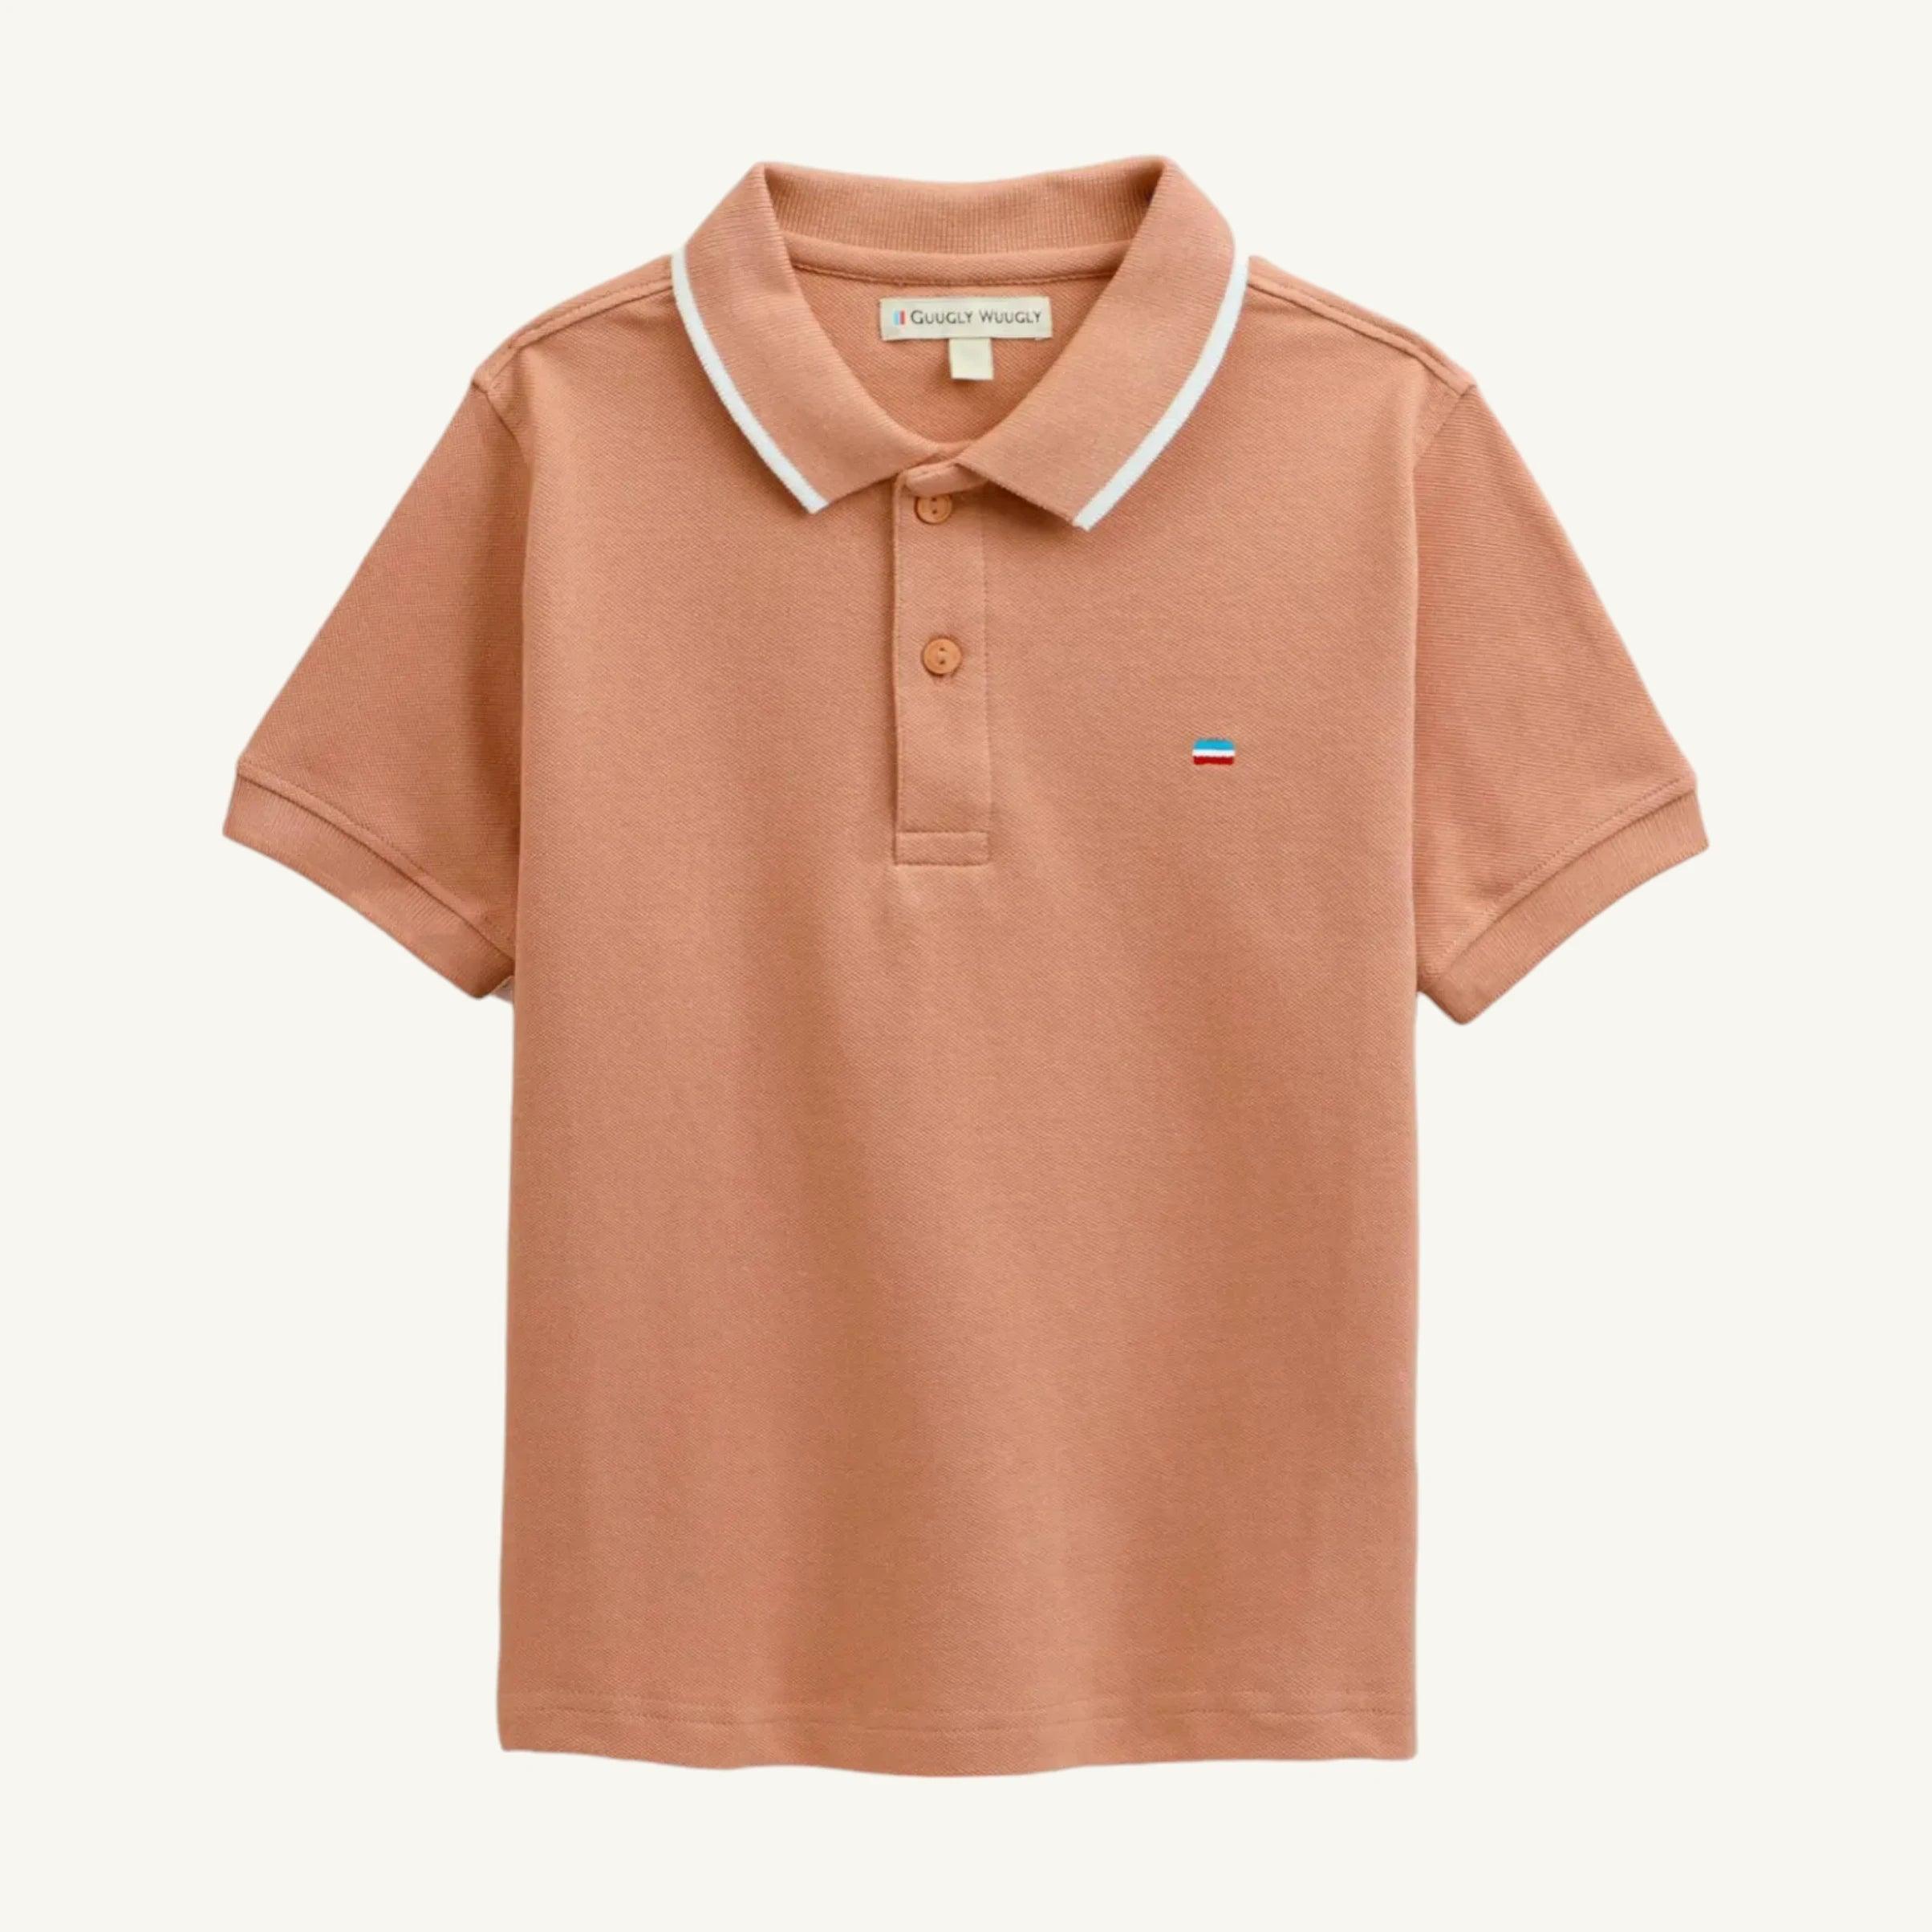 Solid Peach Polo - Guugly Wuugly